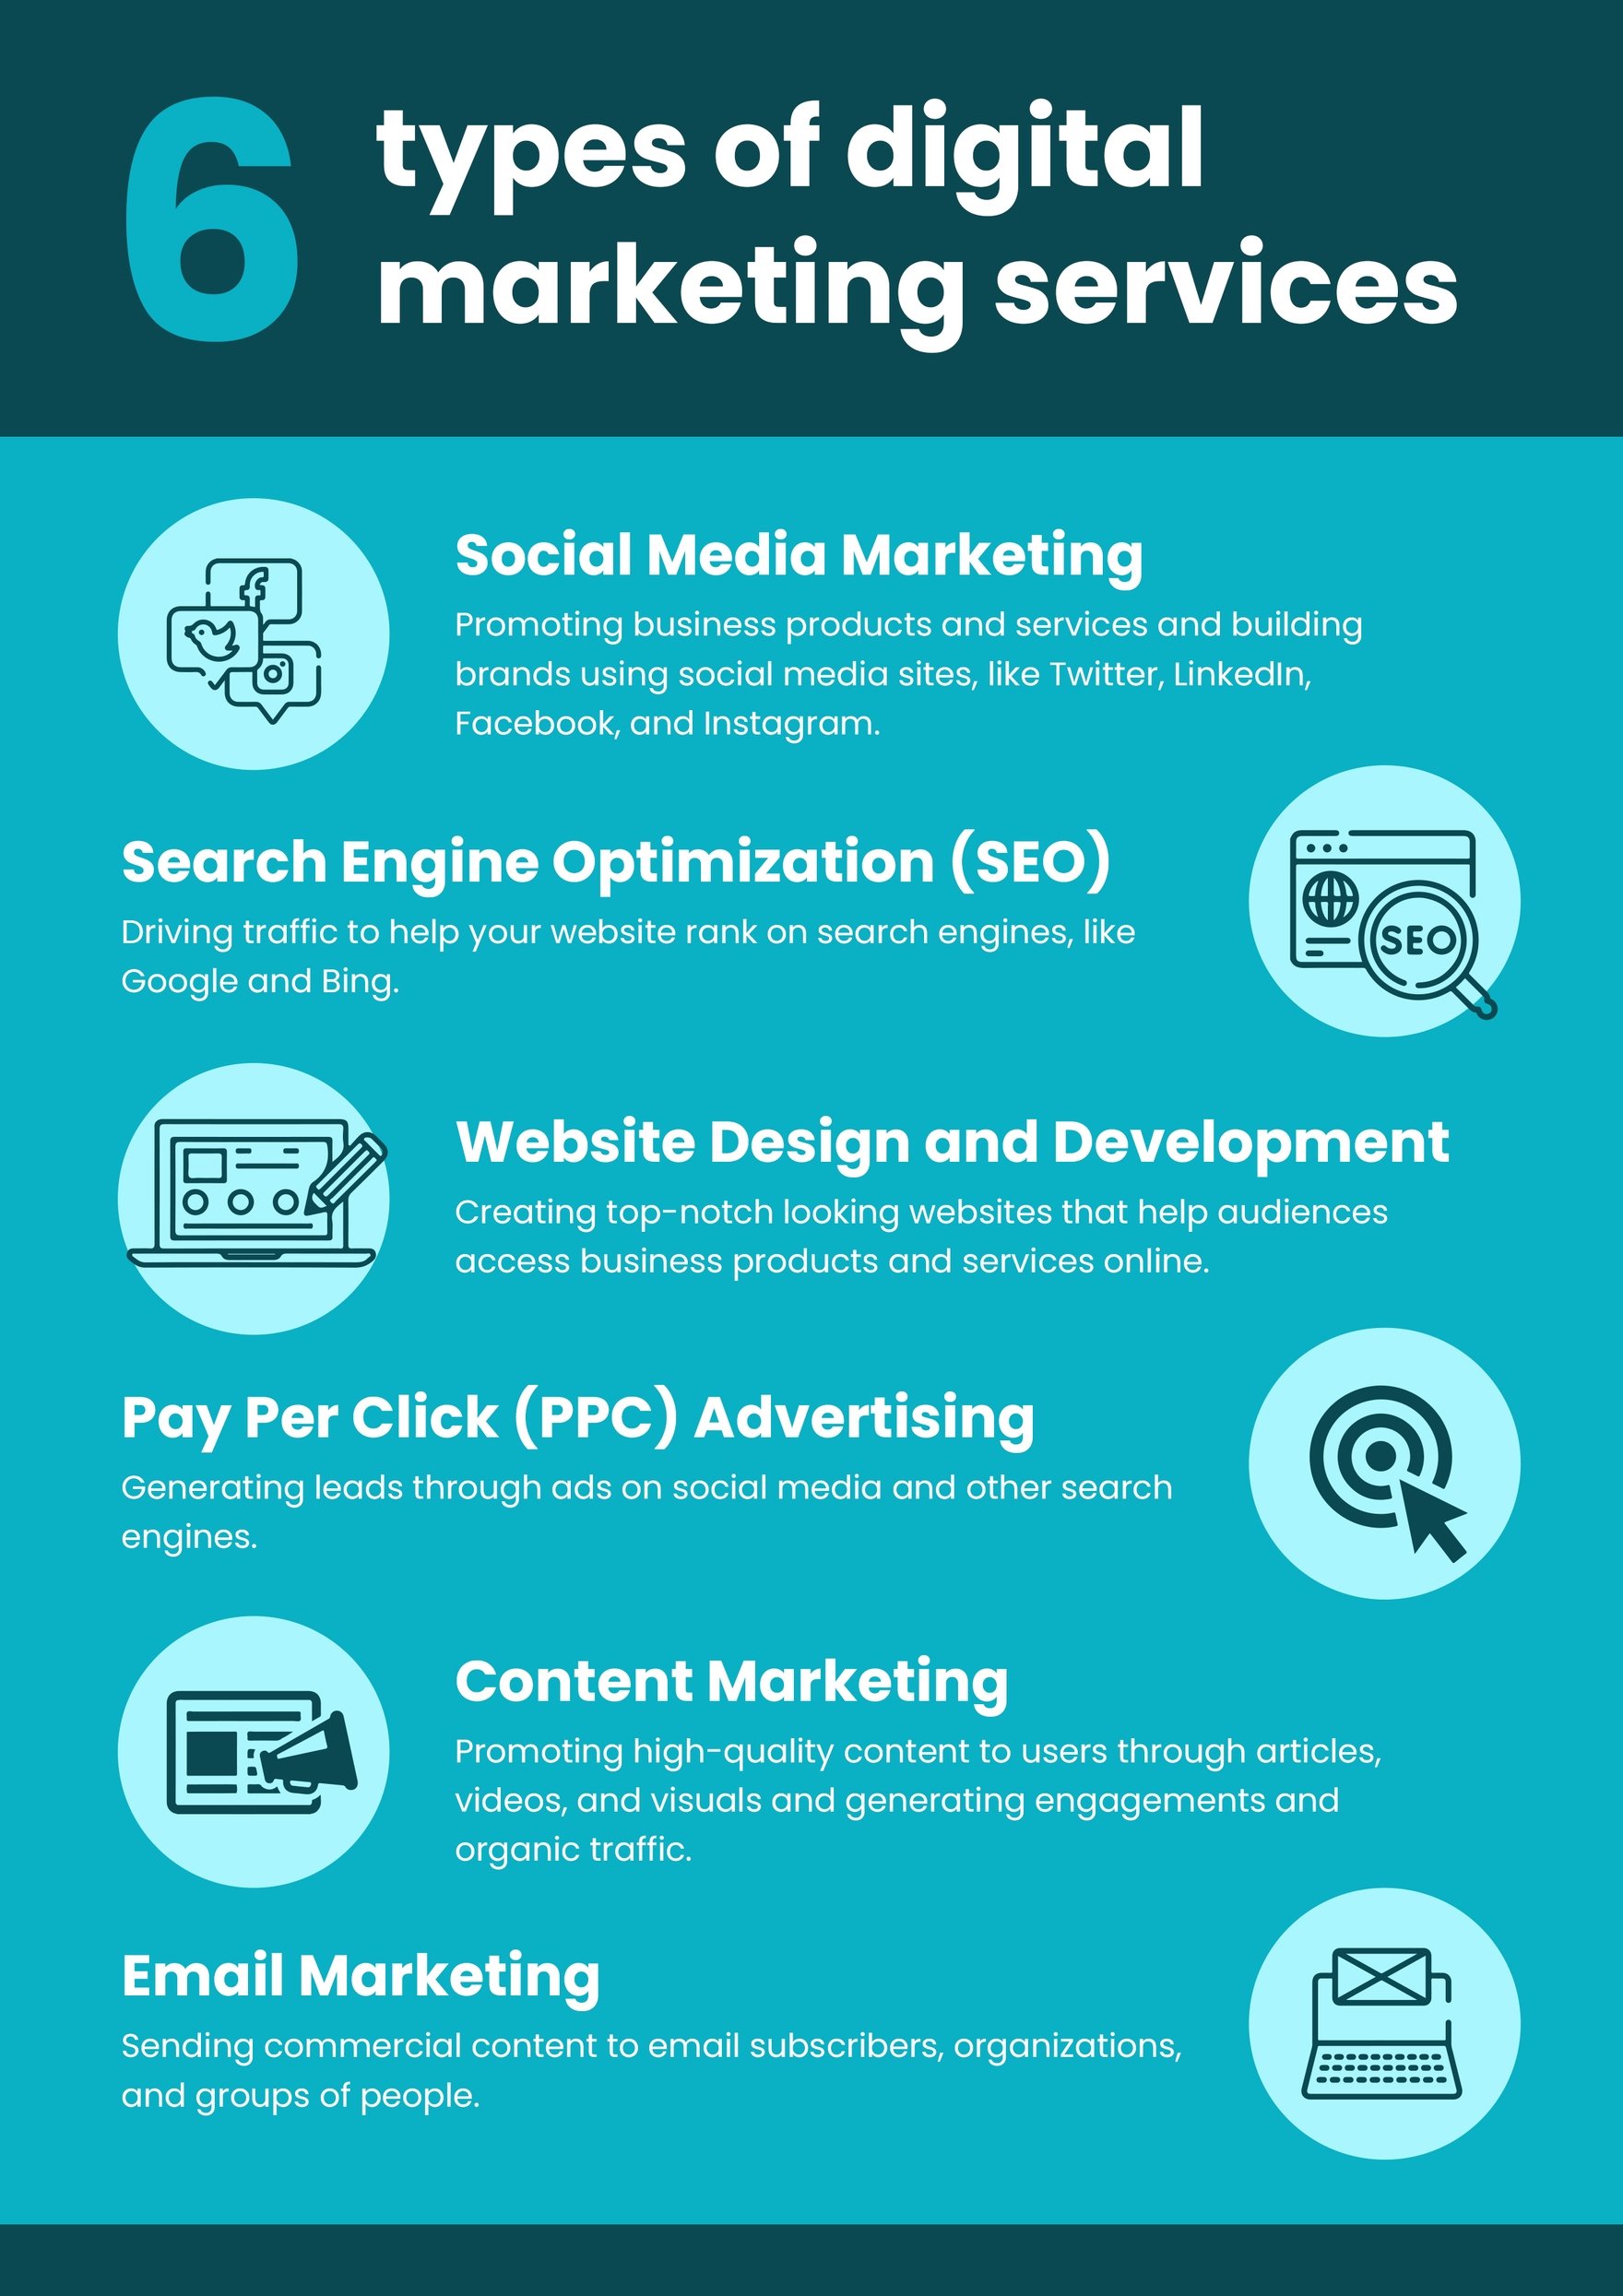 Digital Marketing Services Infographic